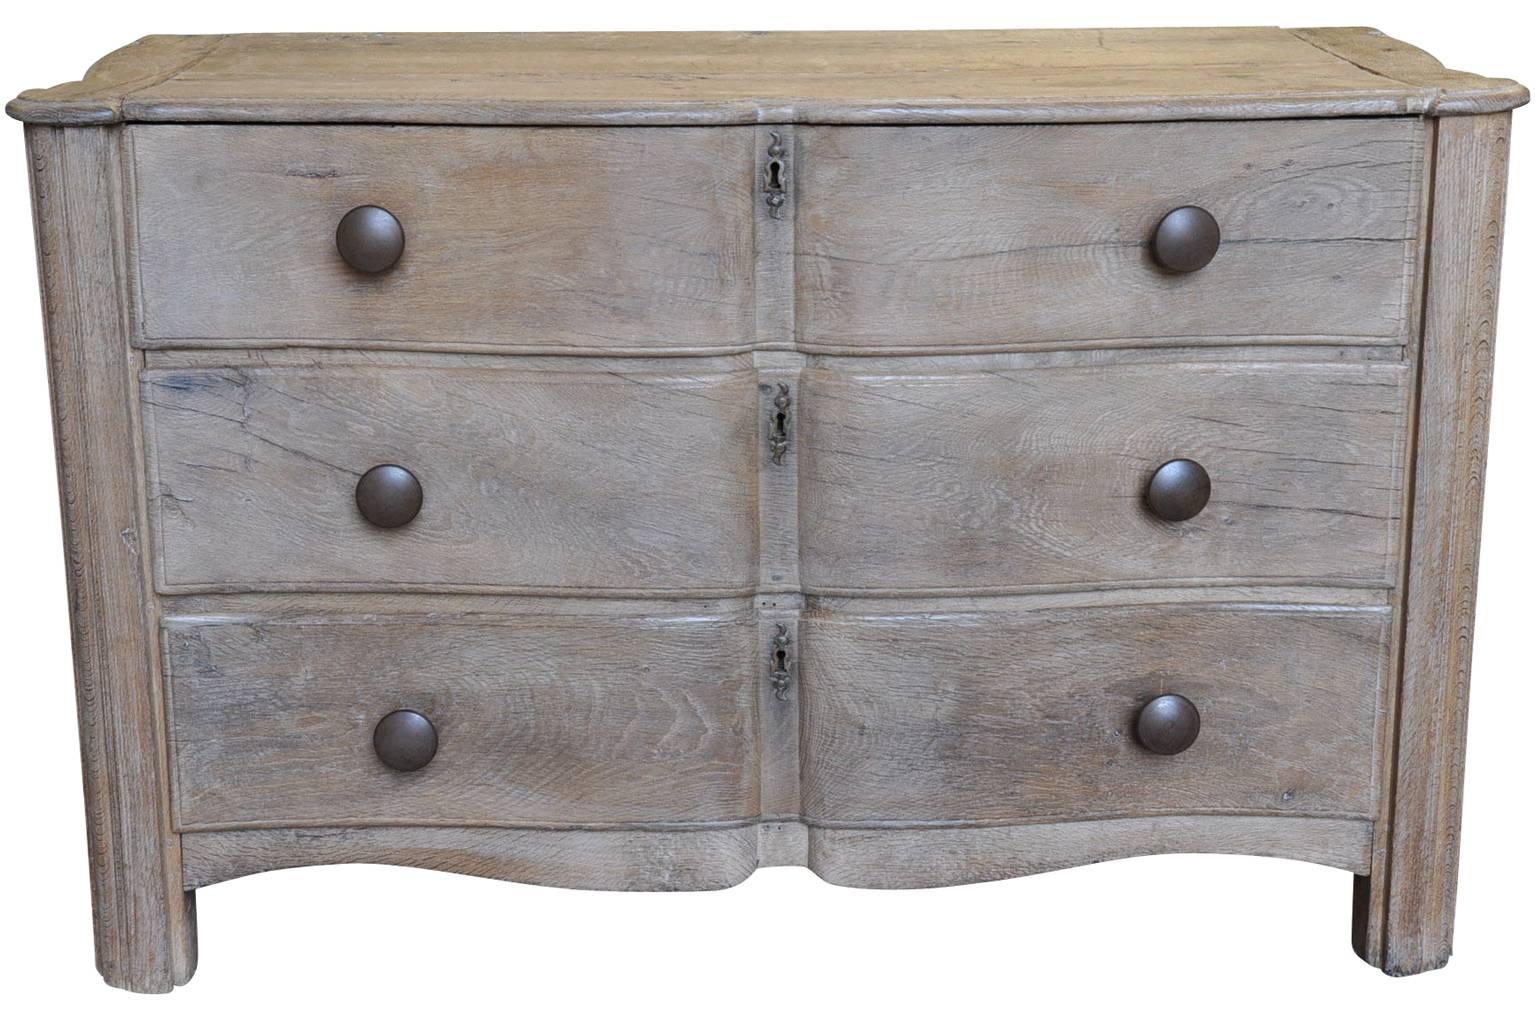 A stunning late 17th century French Louis XIV commode in washed or bleached oak. Beautifully constructed with arbalette form. A wonderful chest of drawers for any living area or bedroom.